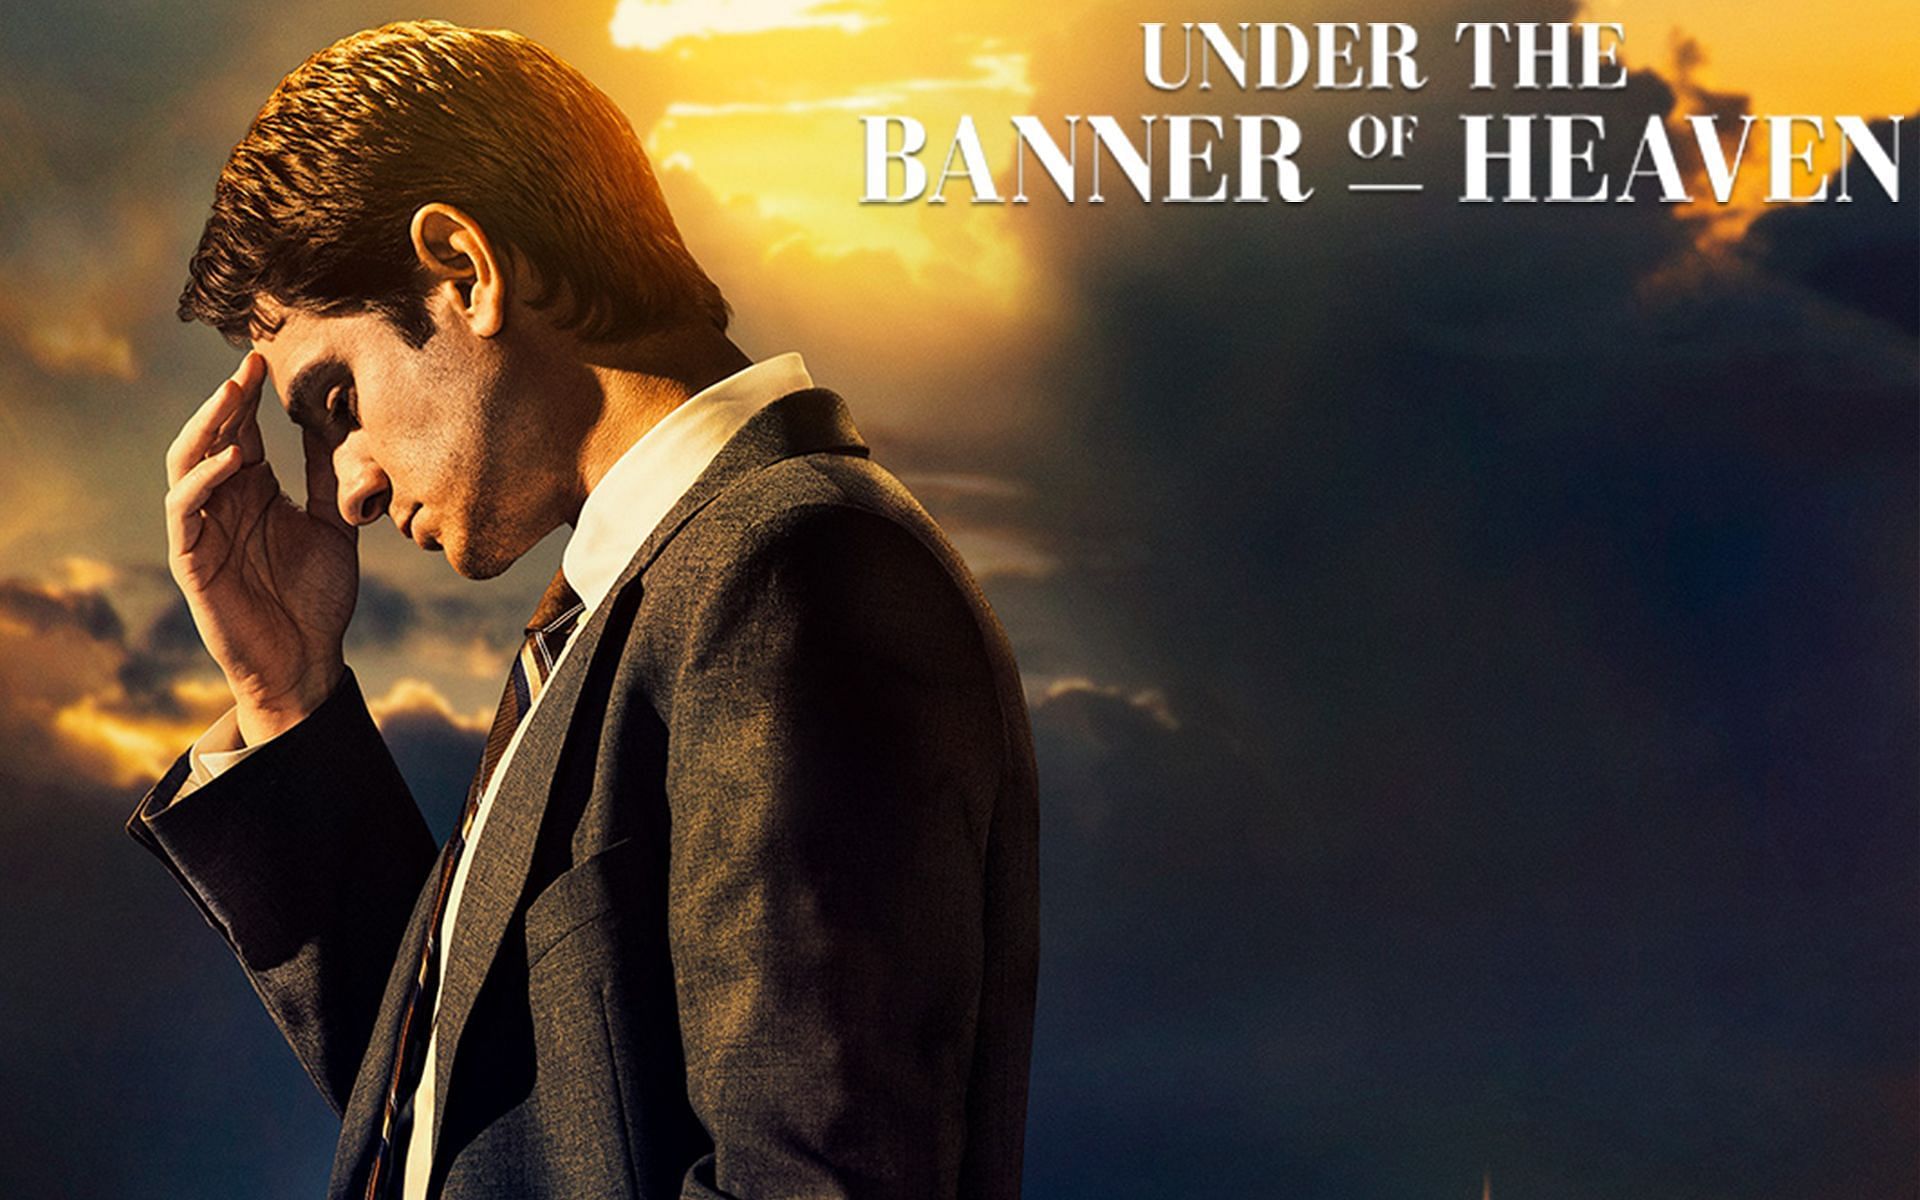 Under the Banner of Heaven will premiere on Hulu on April 28, 2022, at 12.01 AM ET (Image via IMDb)